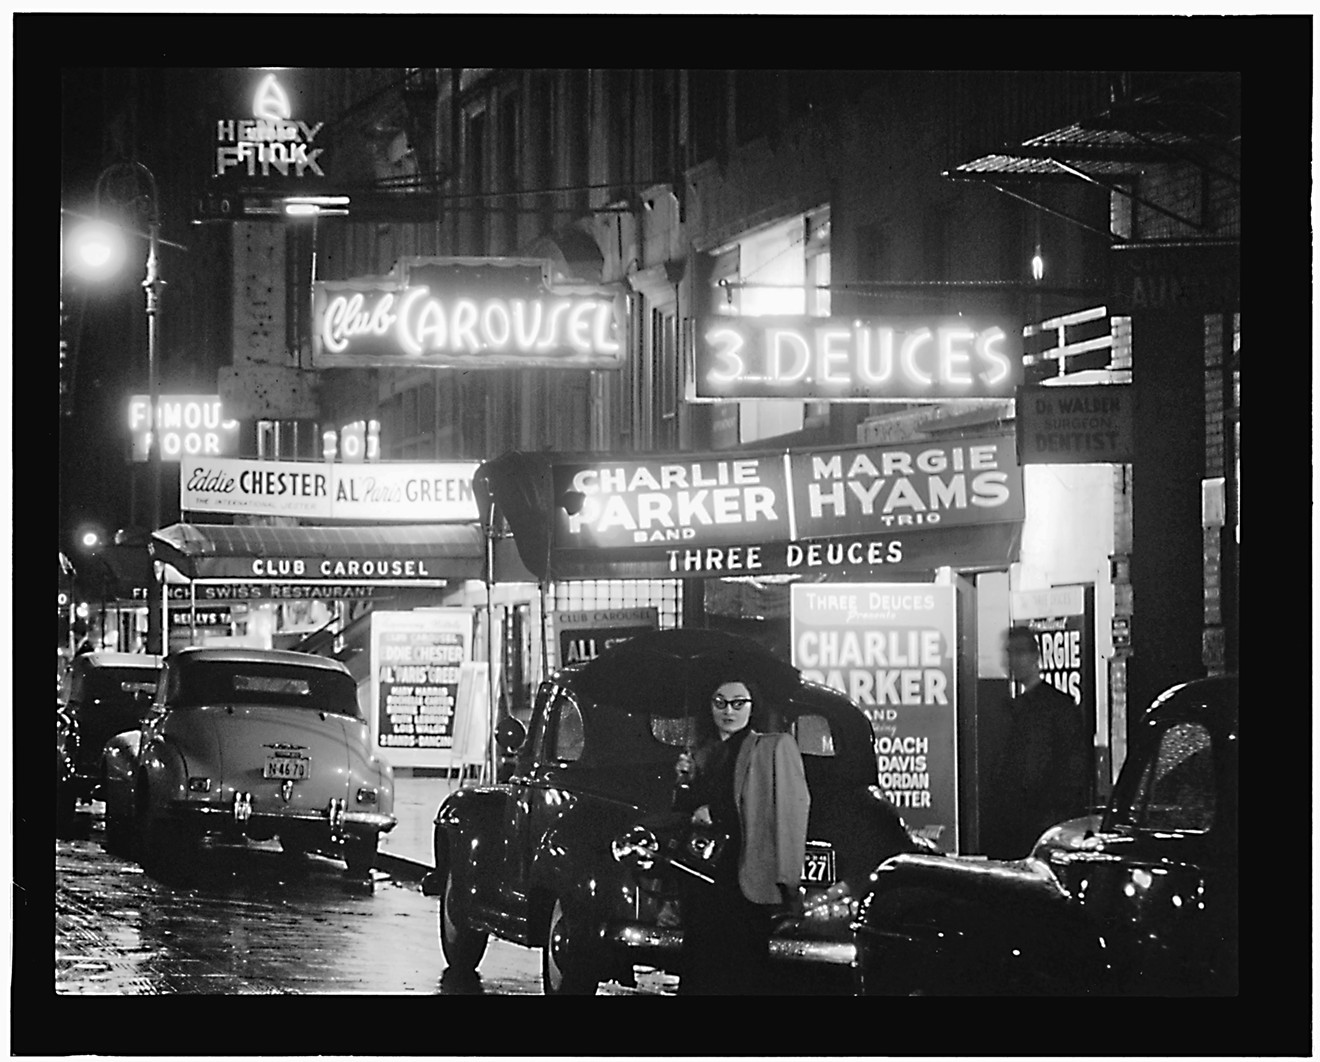 New York's famed 52nd Street lined with jazz clubs.